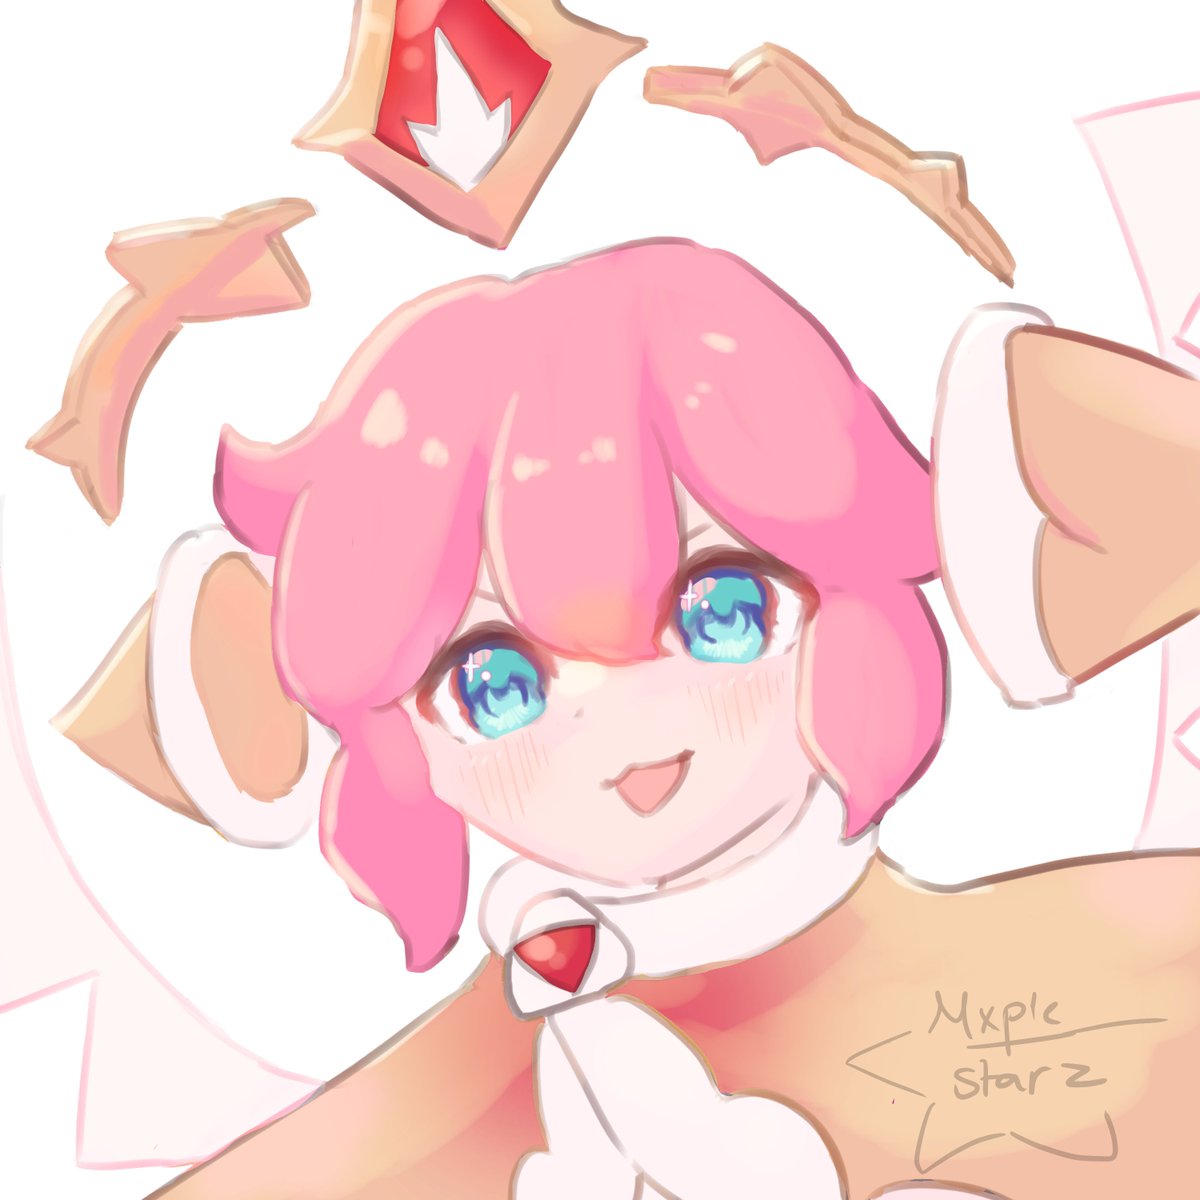 experimenting with a new art style cuz a voice in my head said i can't draw cute stuff
#strawberrycrepecookie #cookierunkingdom